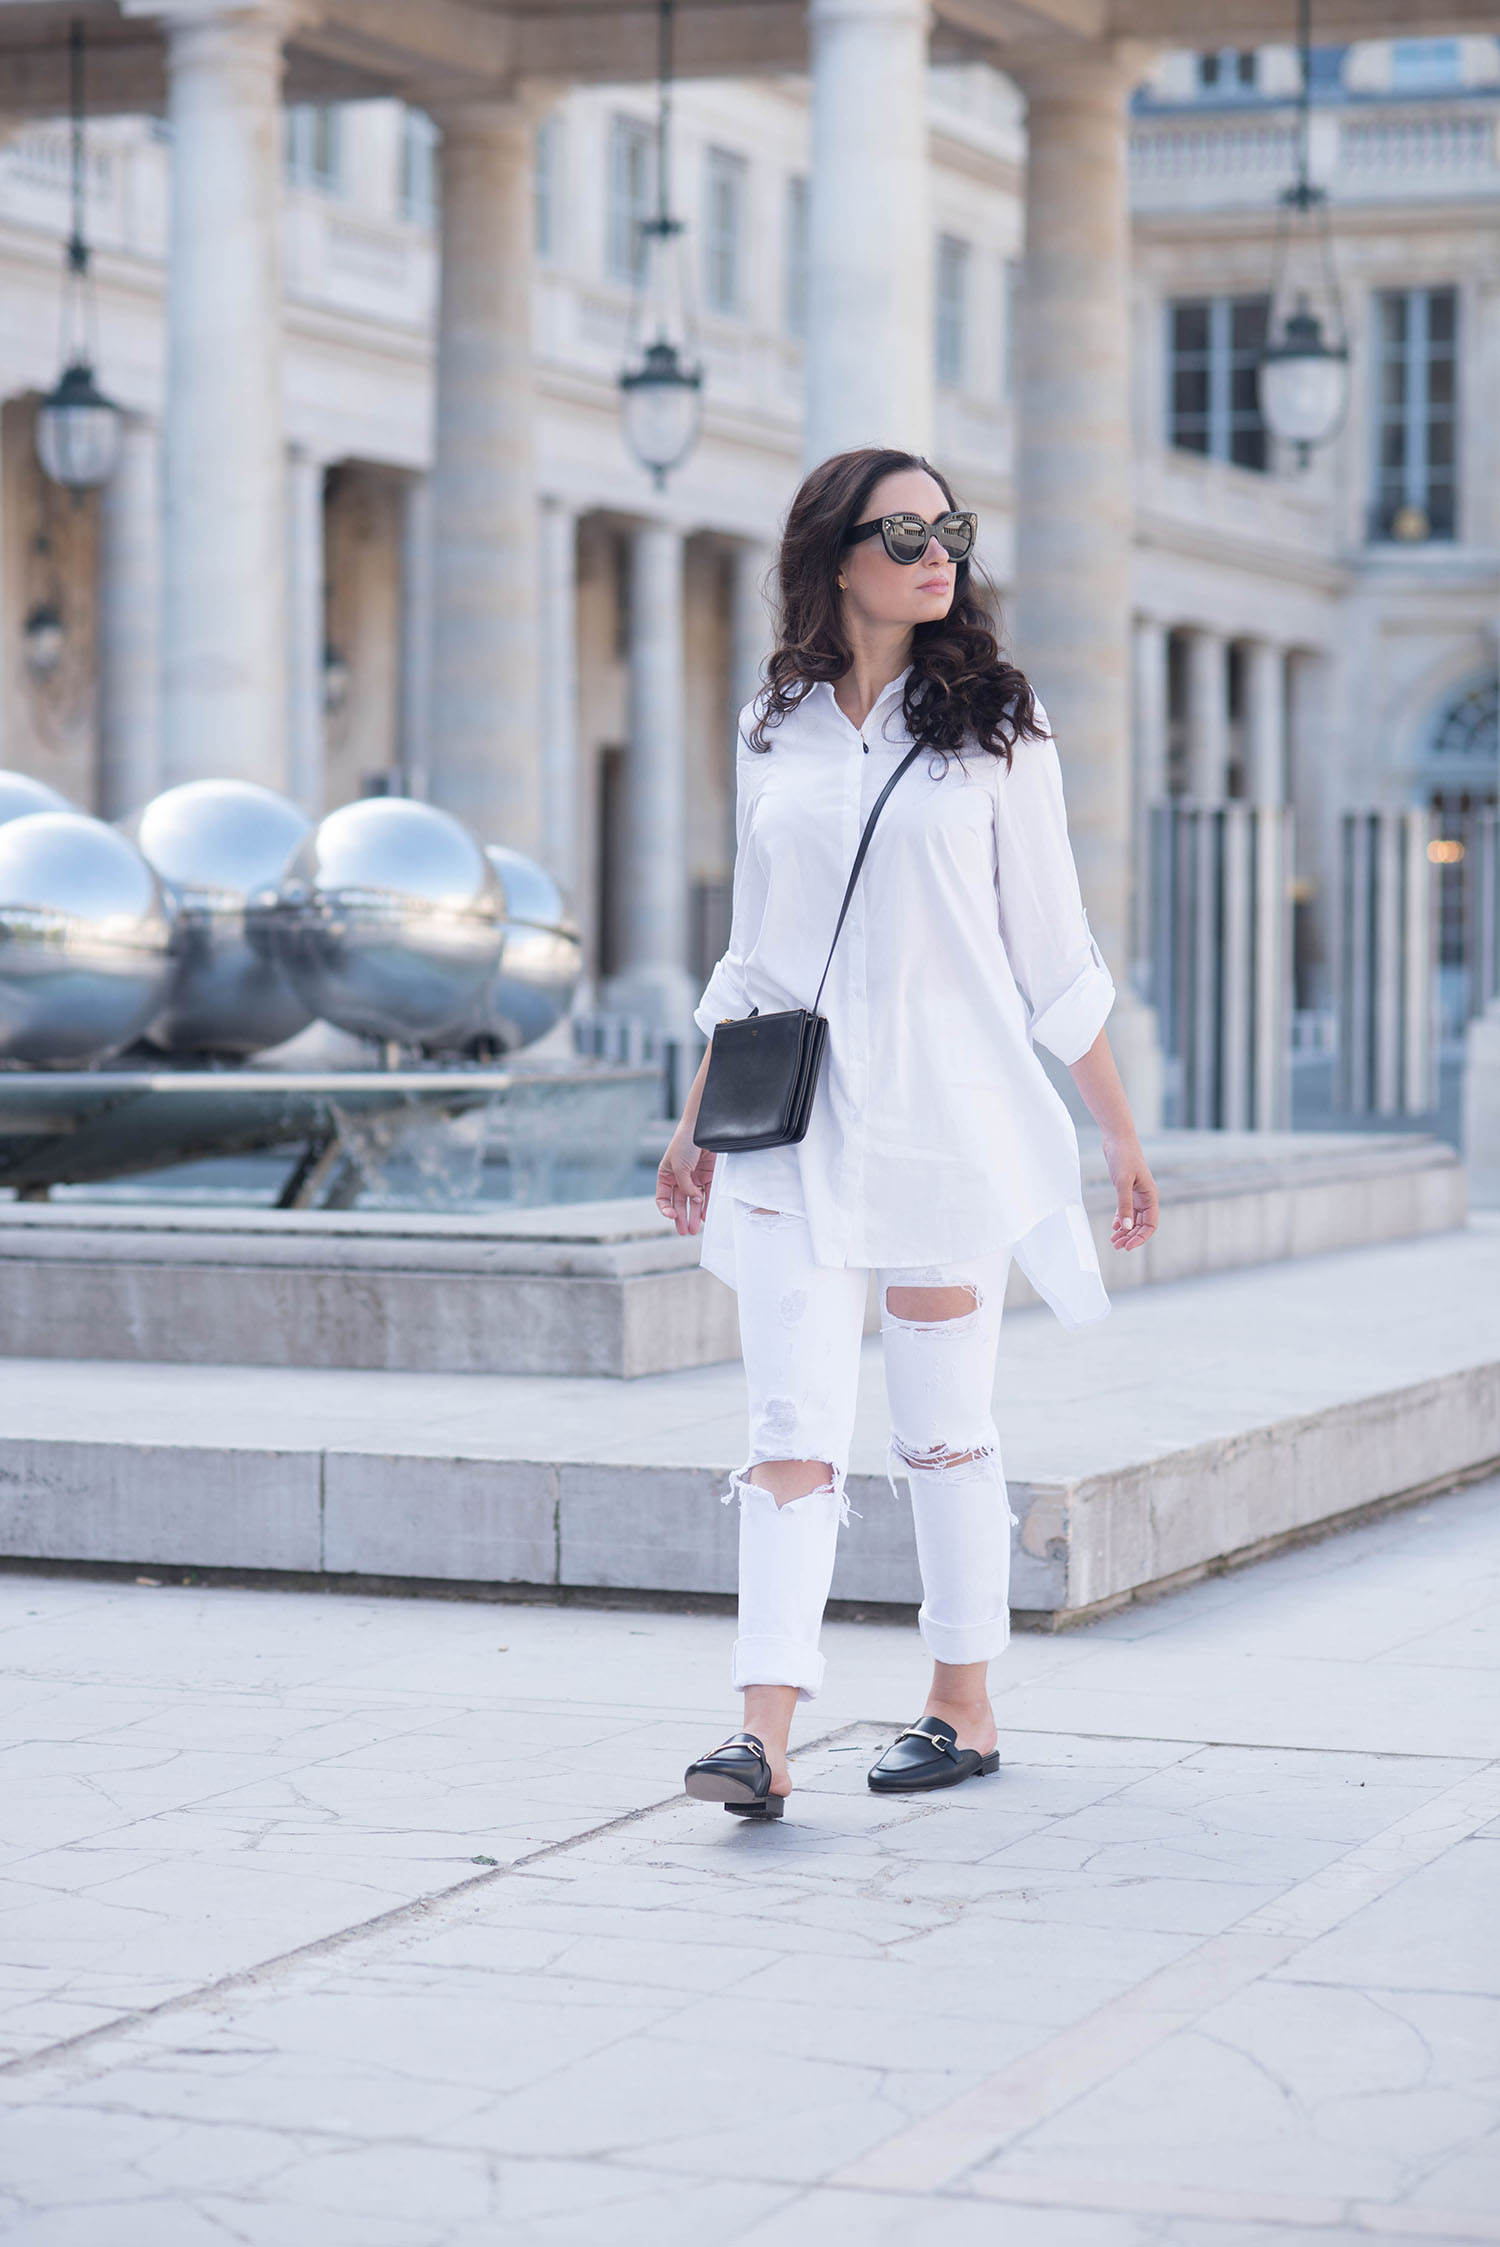 Fashion blogger Cee Fardoe of Coco & Vera at the Palais Royal in Paris, wearing Celine Audrey sunglasses and Grlfrnd Karolina white jeans